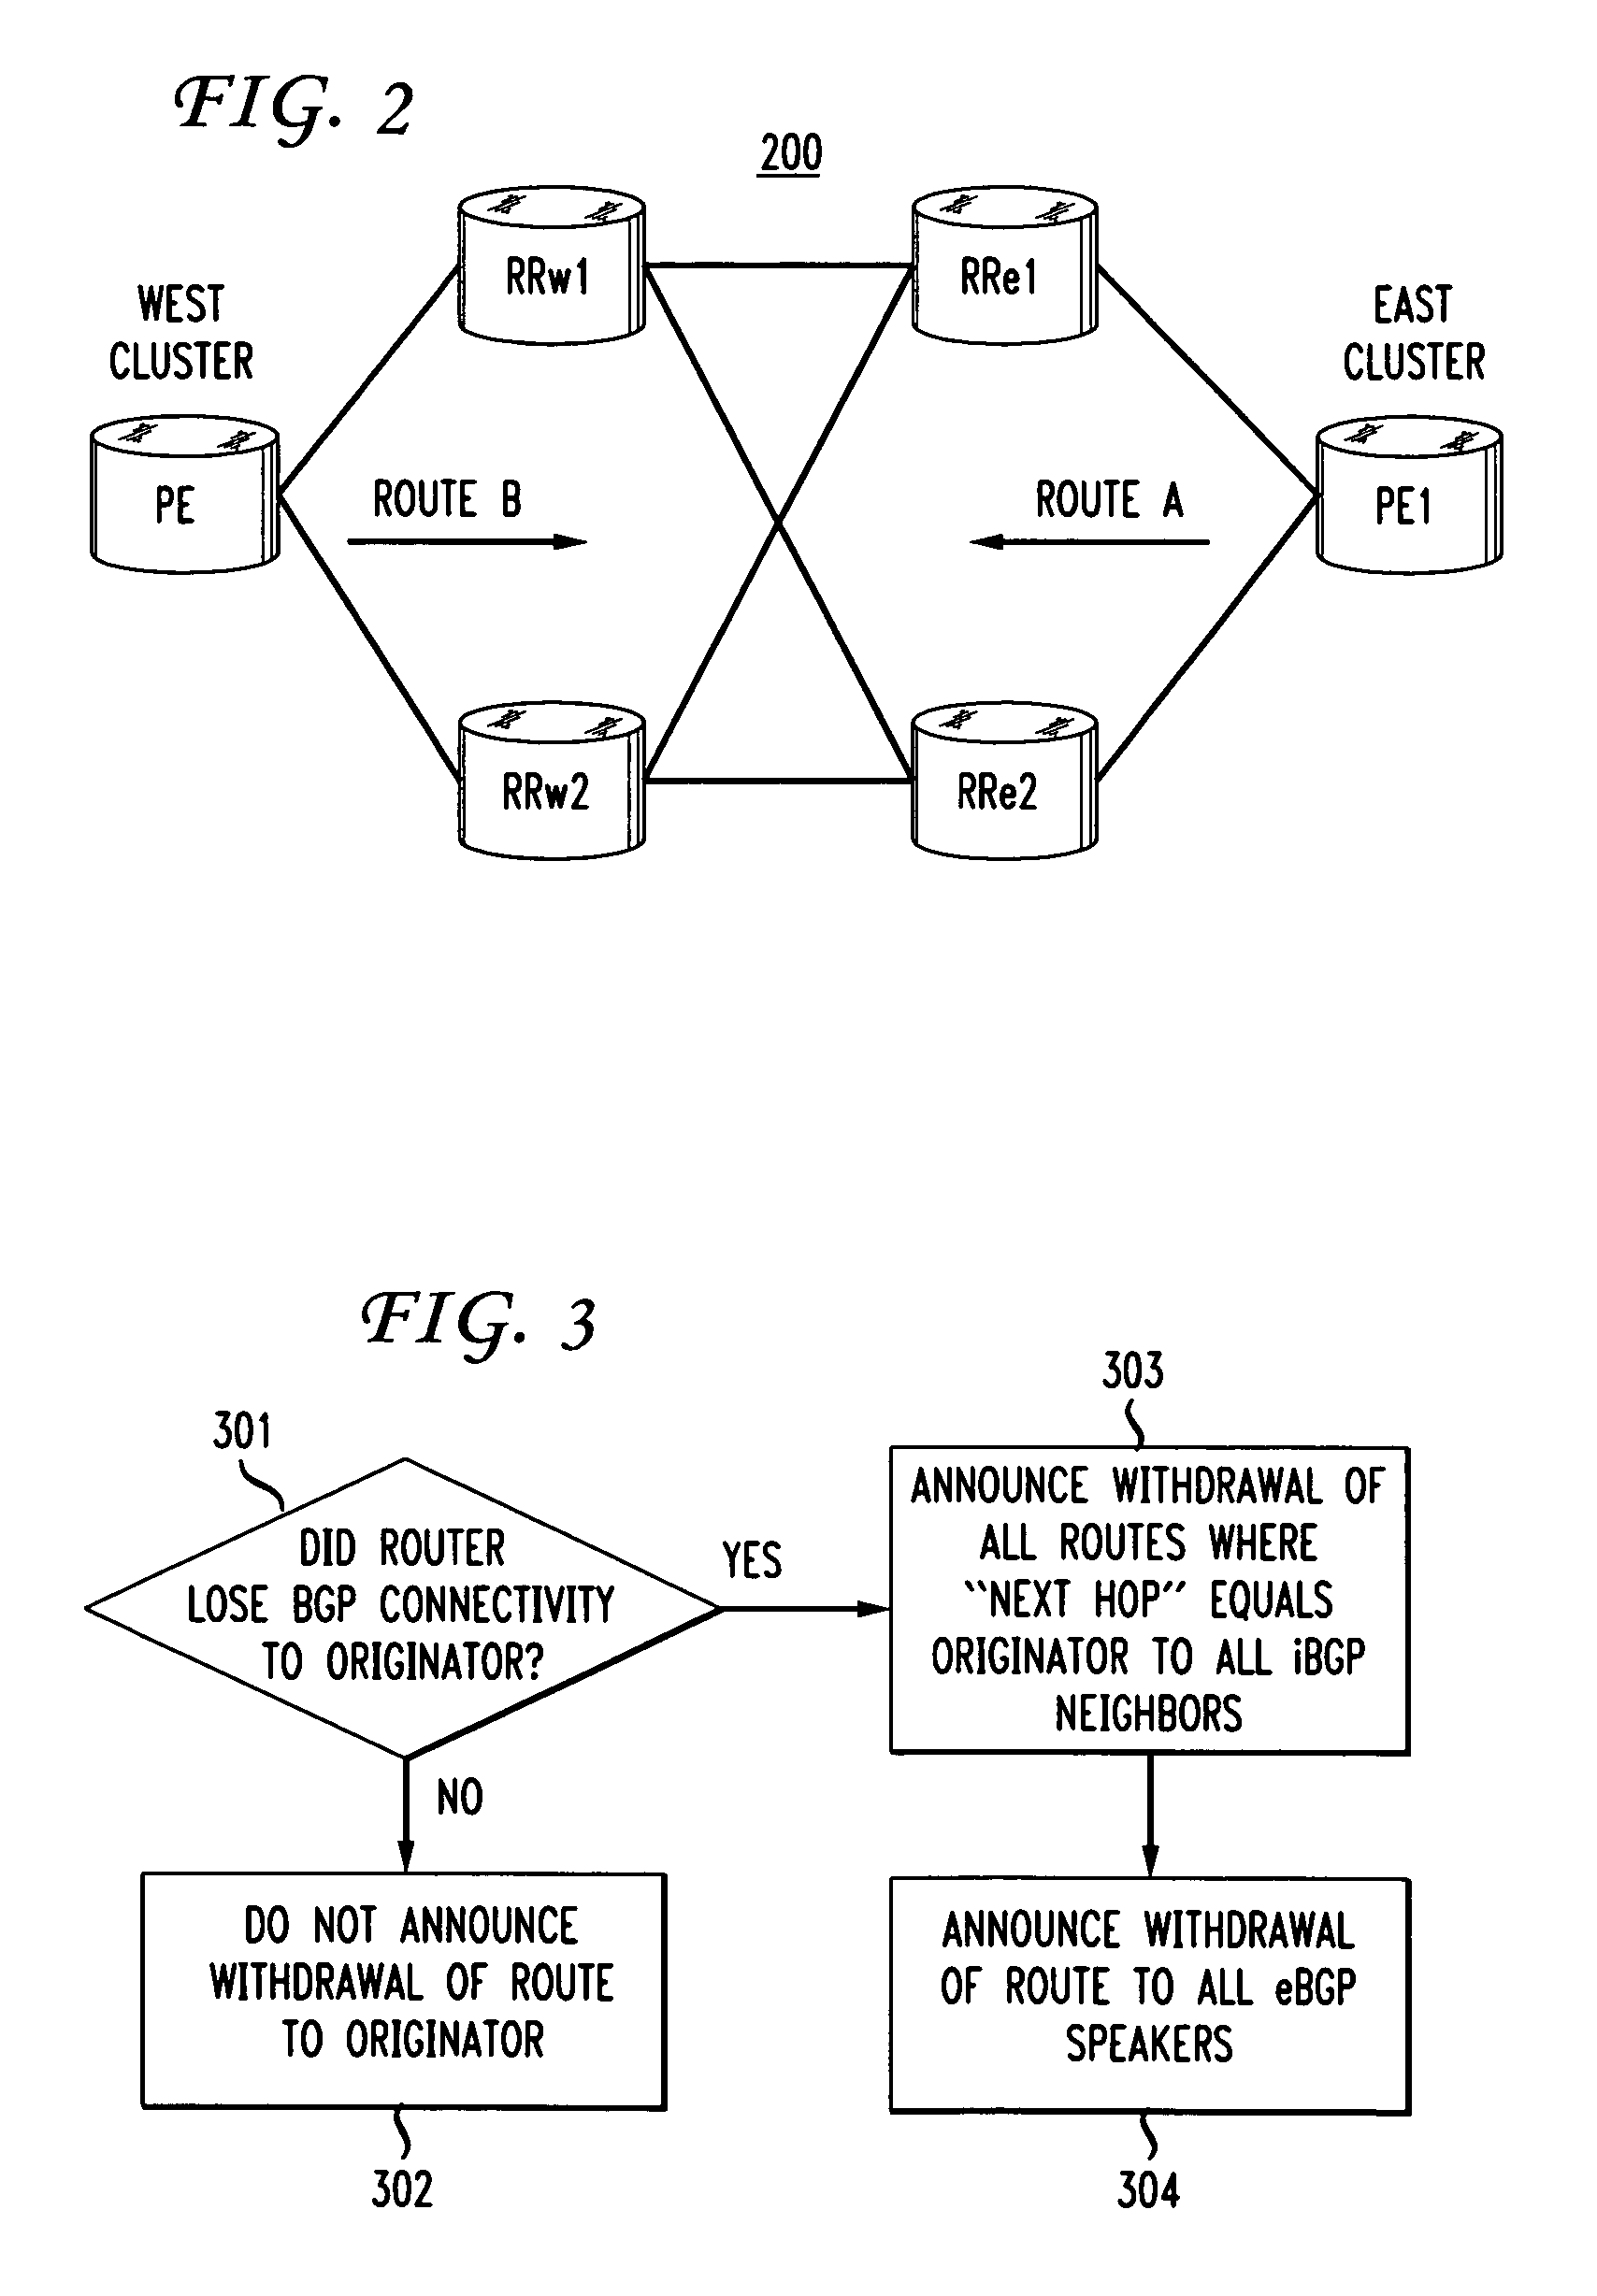 Method and system for survival of data plane through a total control plane failure